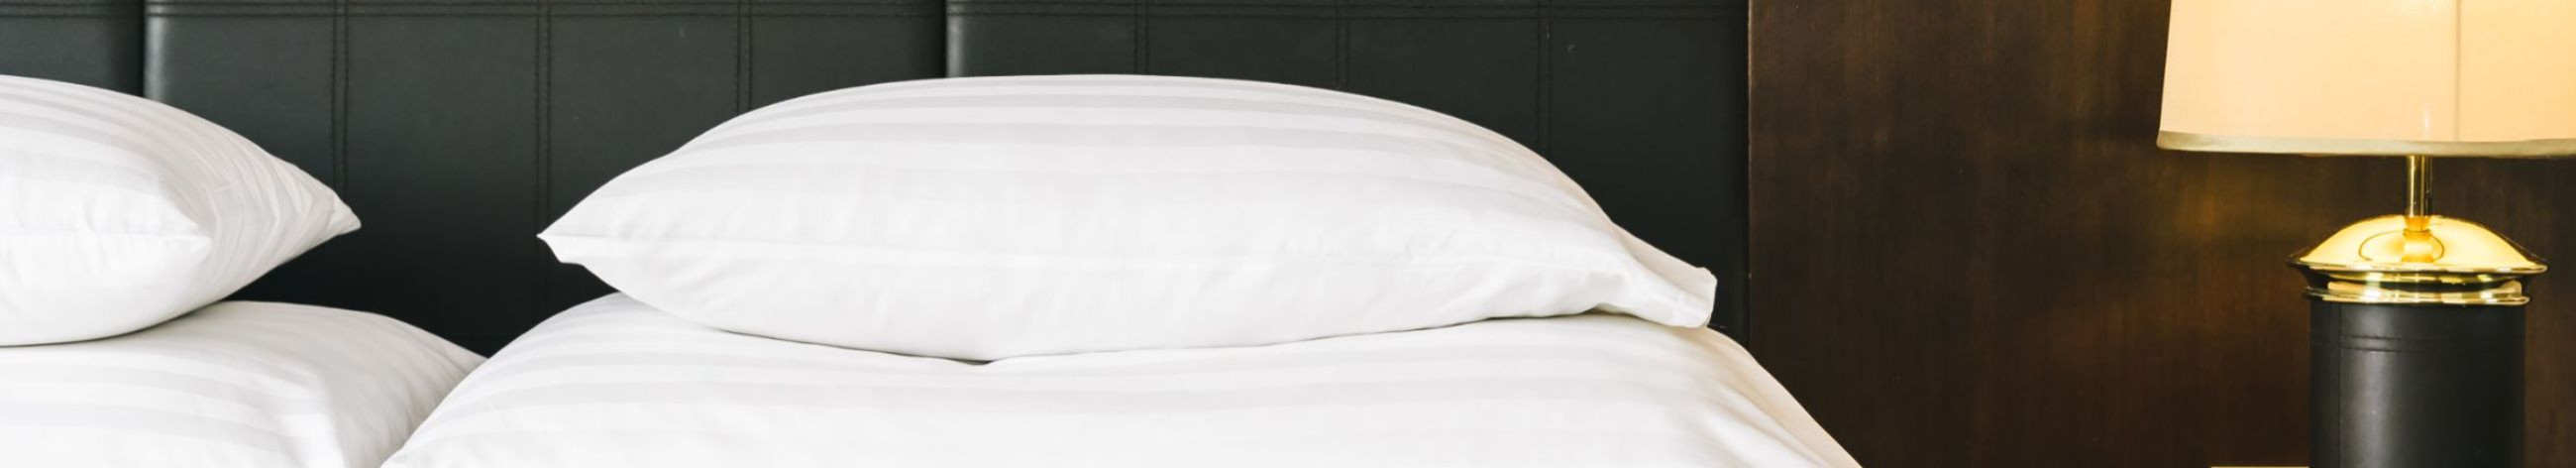 We specialize in providing high-quality sleep solutions, including beds, continental beds, and mattress toppers.